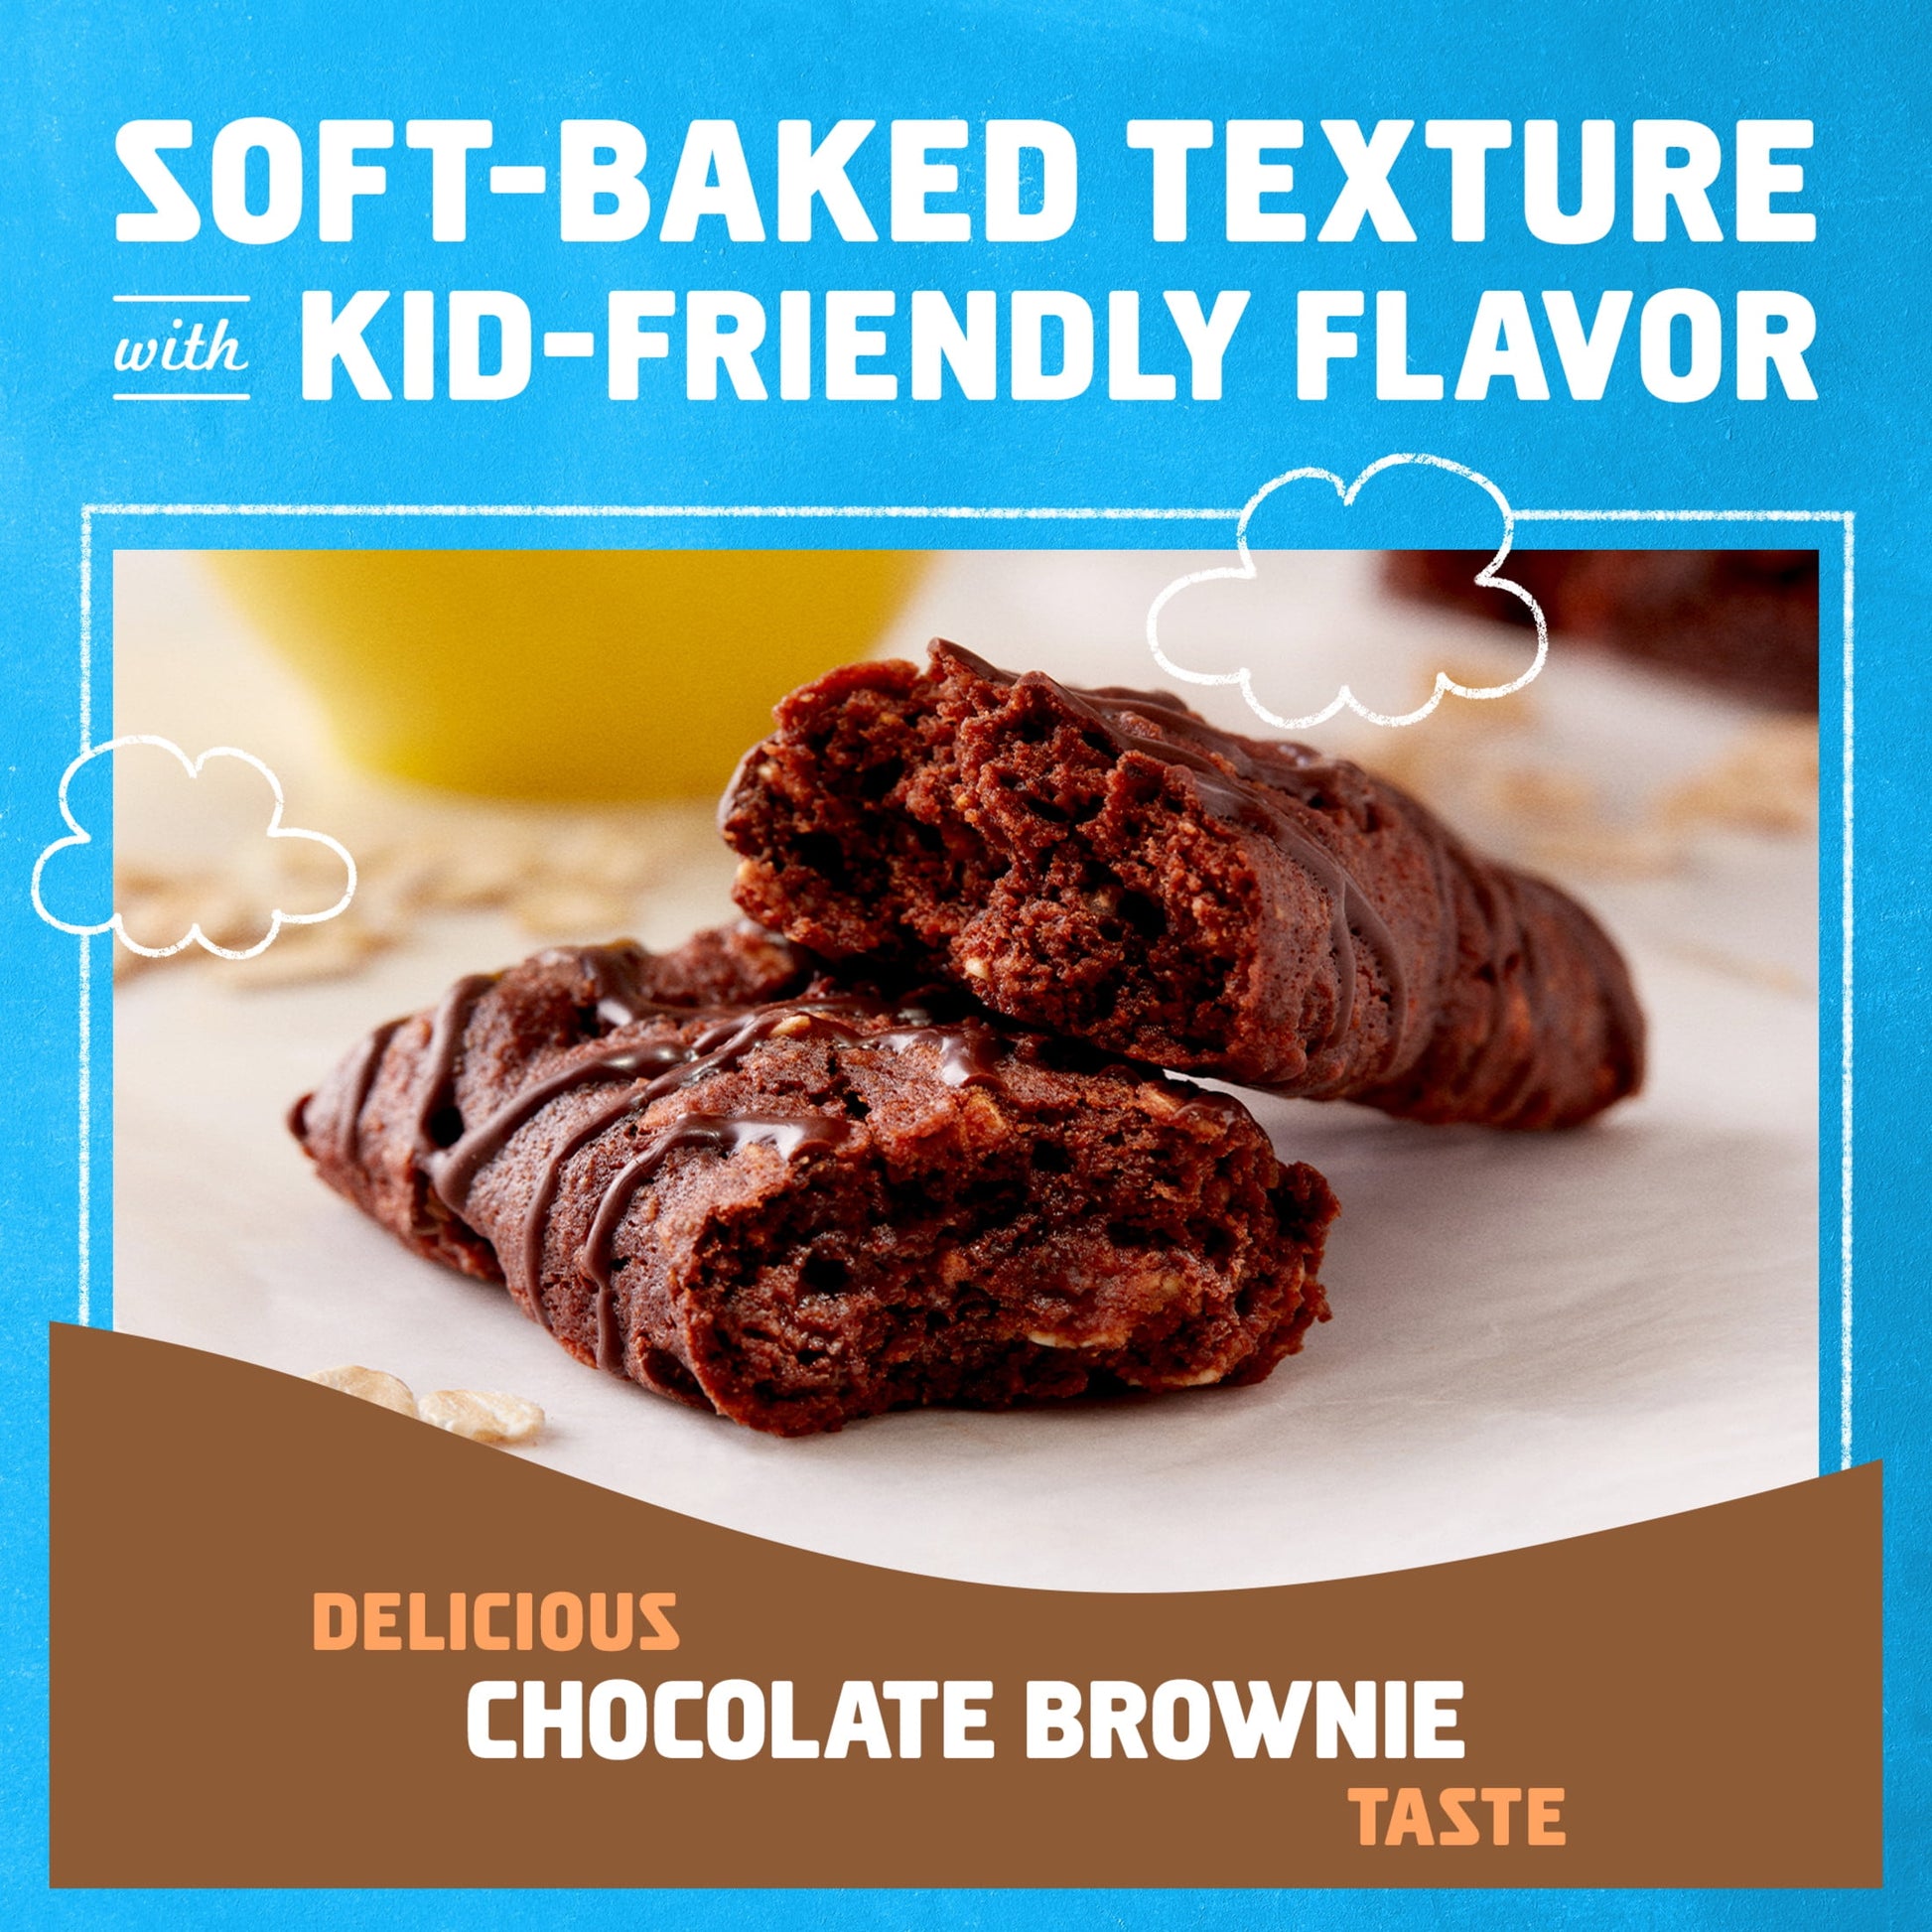 - Chocolate Brownie - Soft Baked Whole Grain Snack Bars - USDA Organic - Non-Gmo - Plant-Based - 1.27 Oz. (6 Pack)